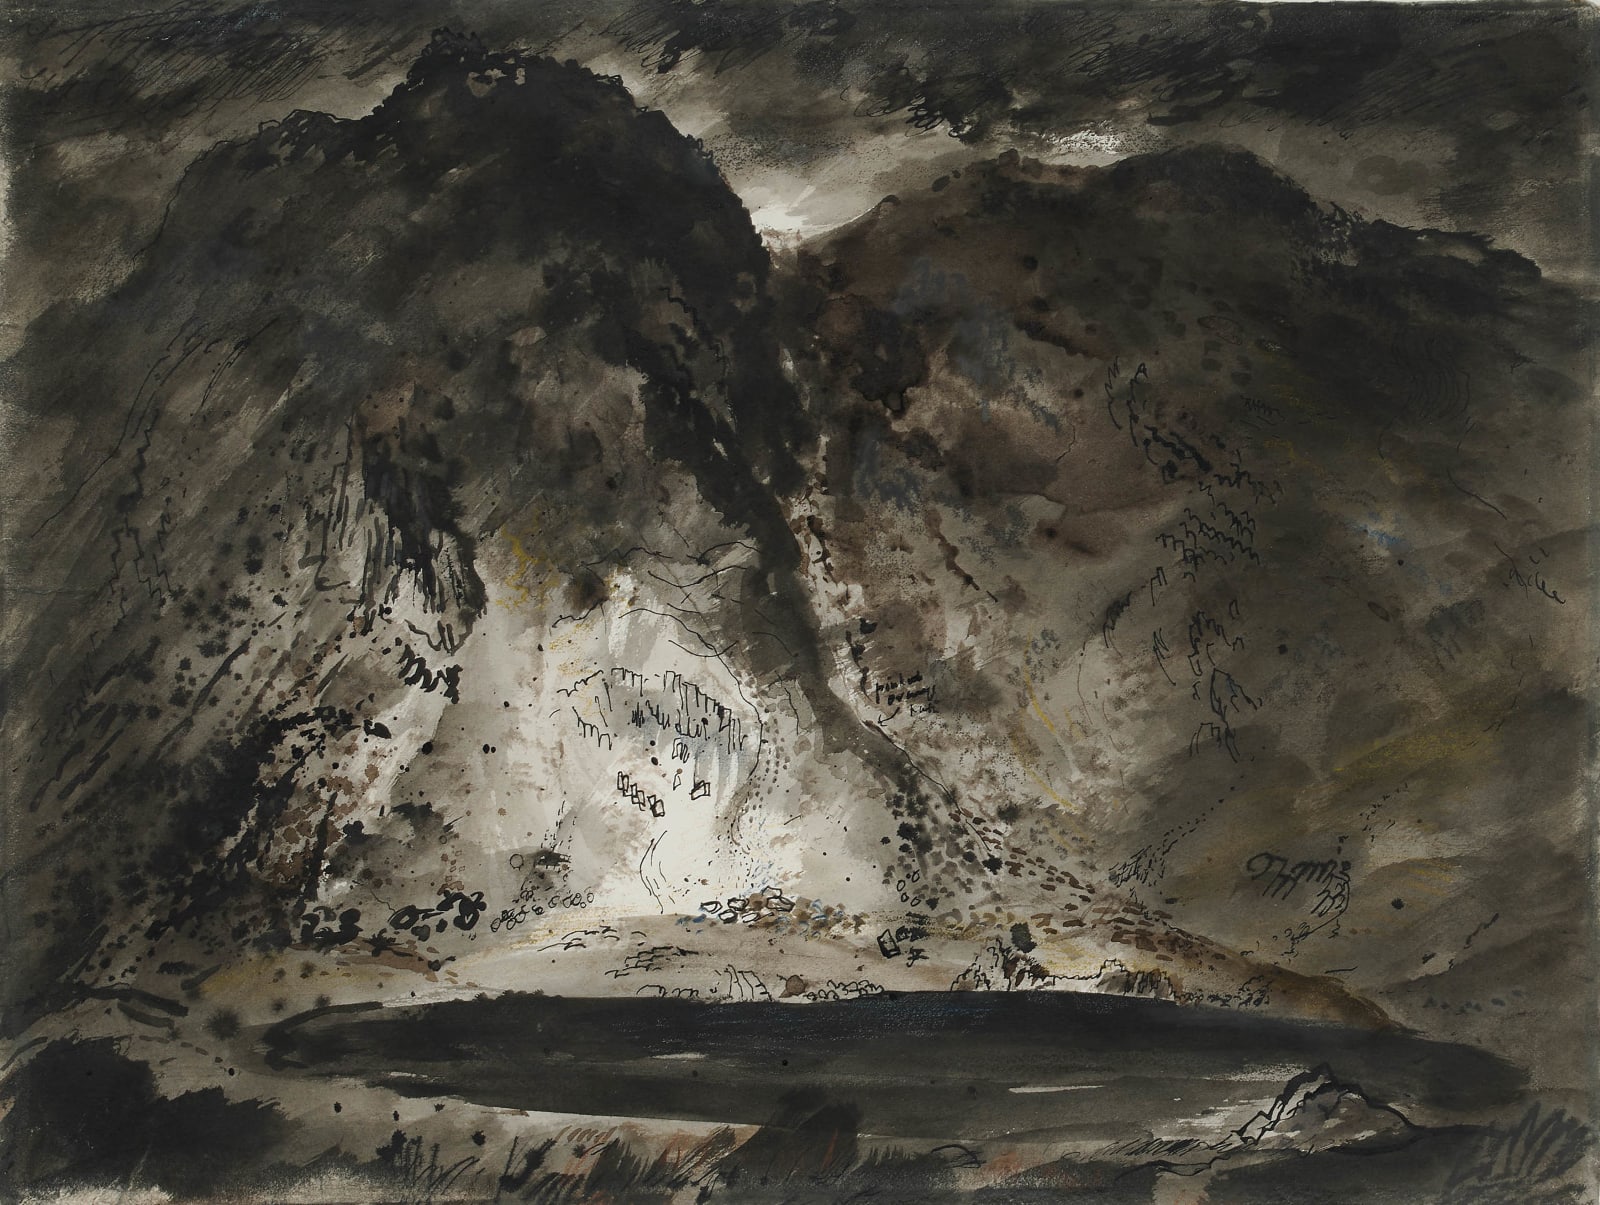 John Piper, Study for Rise of the Dovey, 1943-44